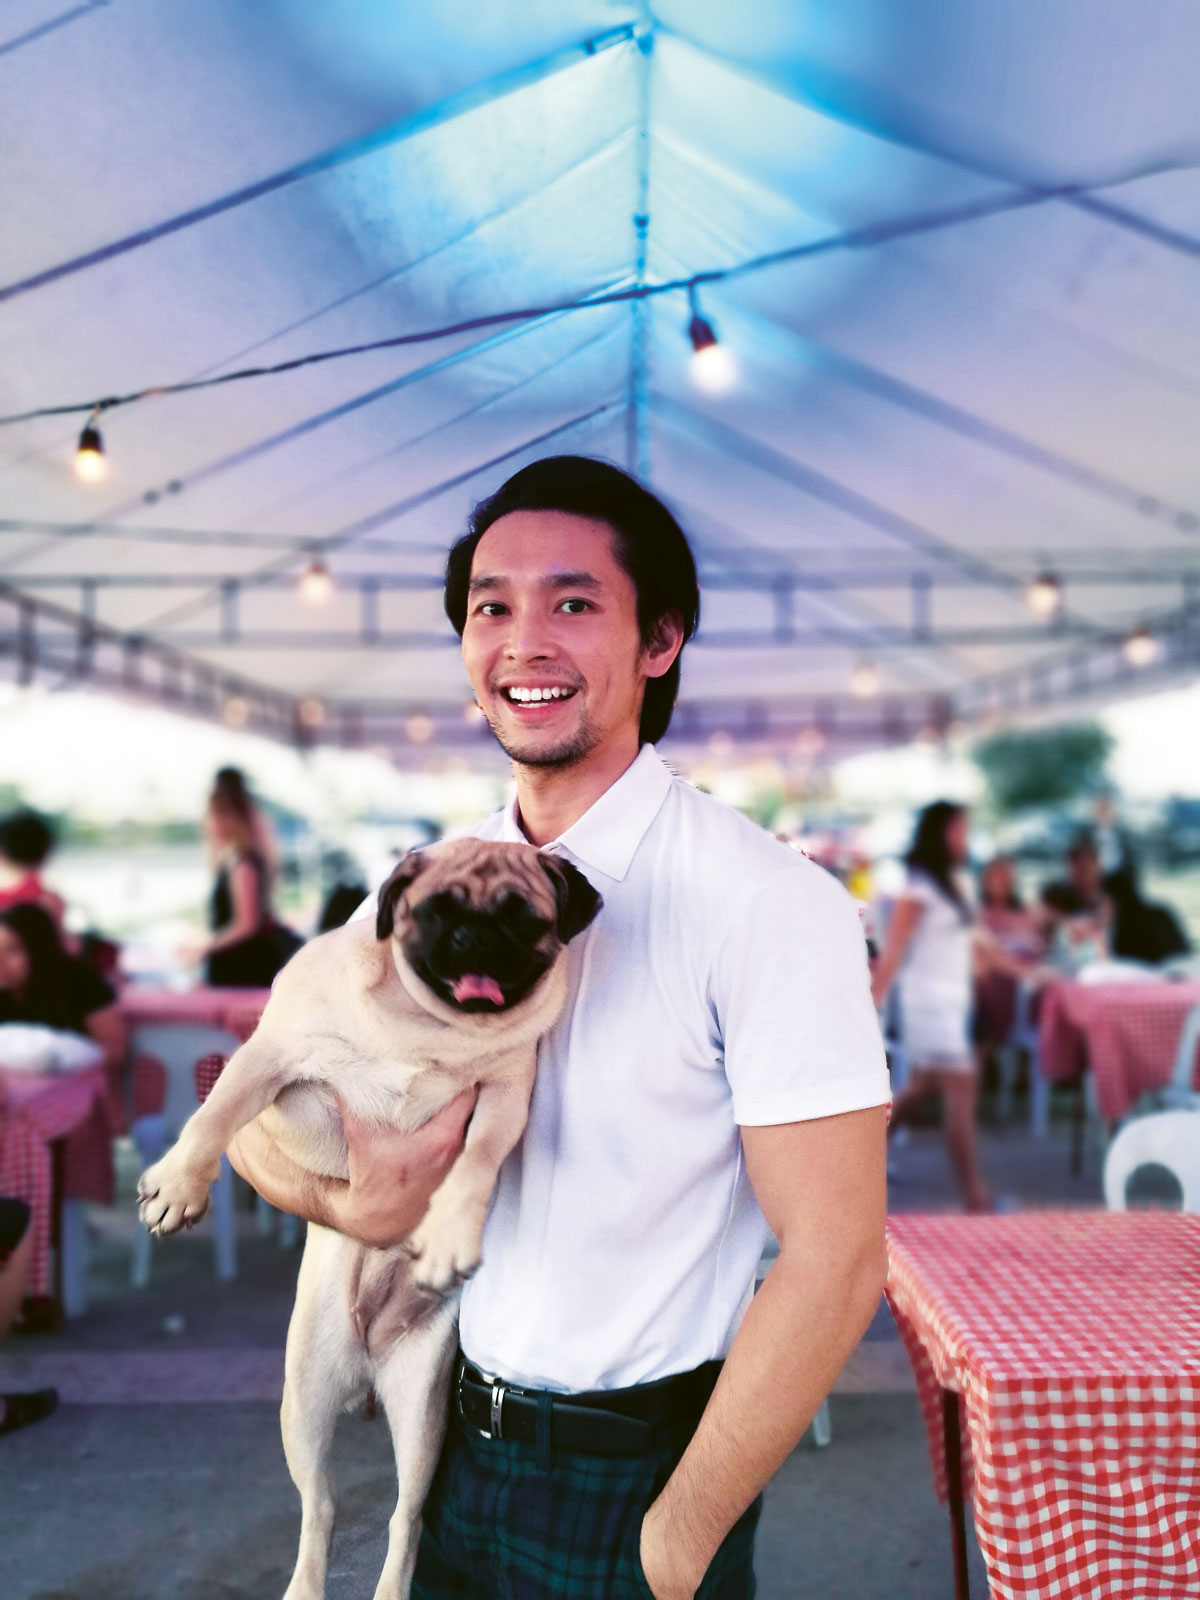 Cebu-based Michael Karlo Lim has his roots in food blogging before venturing out into other interests like fashion and lifestyle